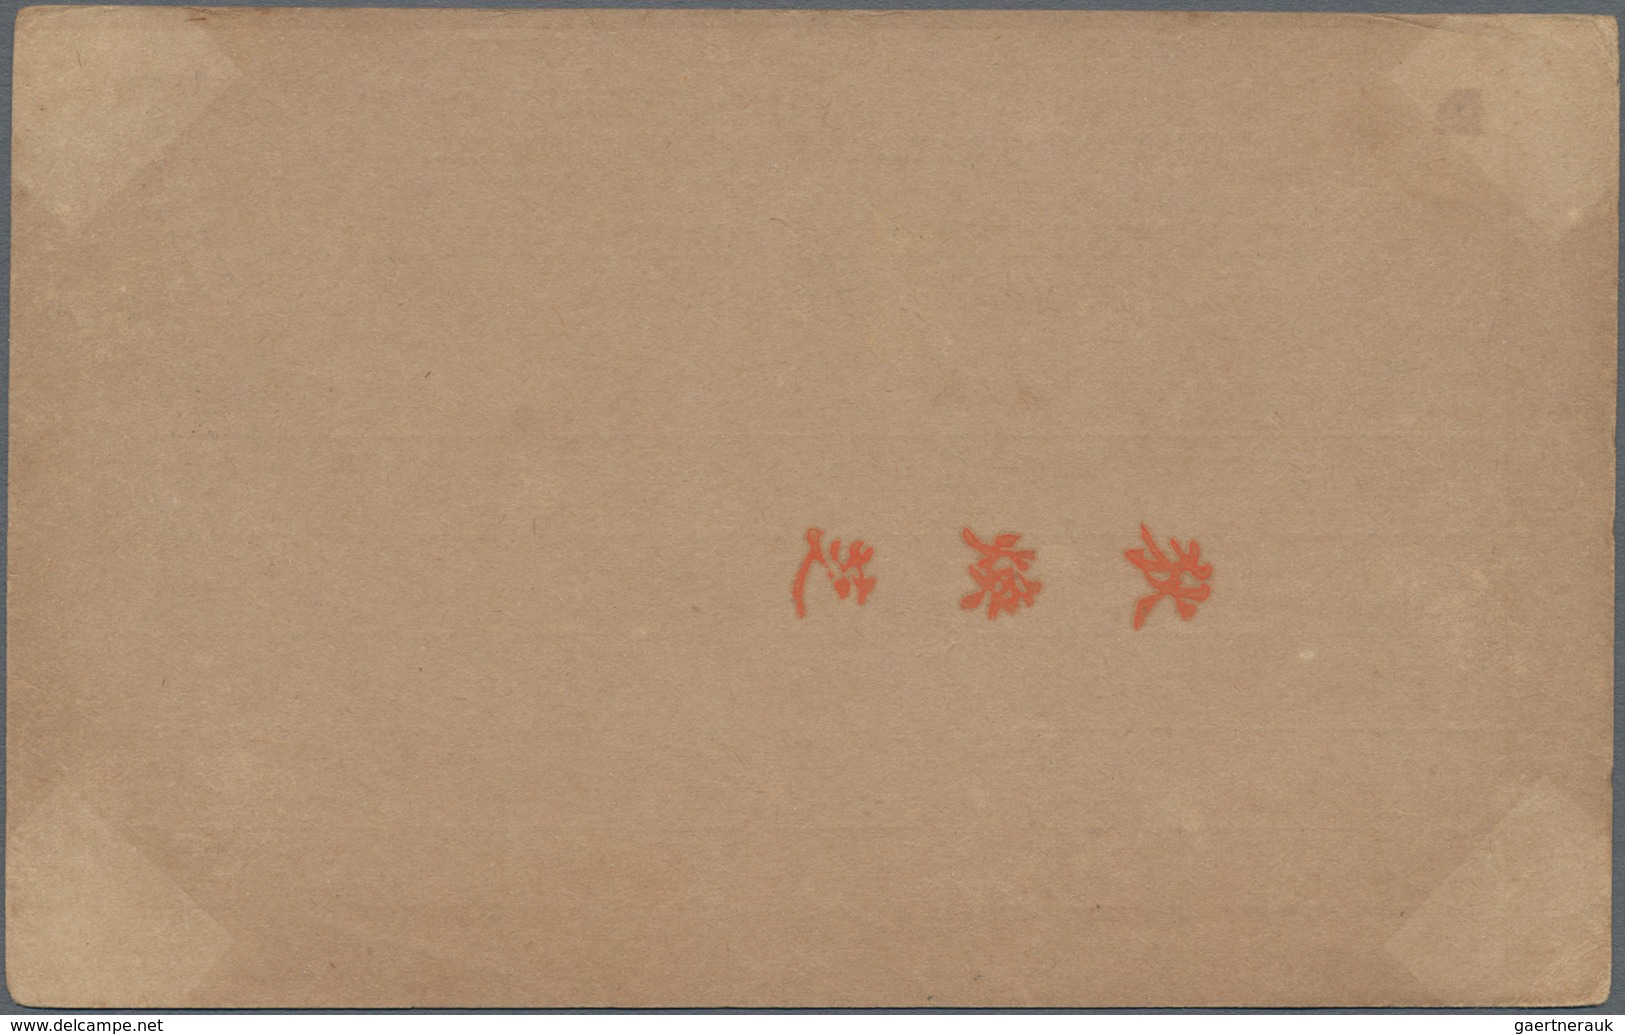 Russische Post In China: 1899/1910, Covers (2), Ppc (3) And Used Stationery (1) From Peking, Tientsi - China